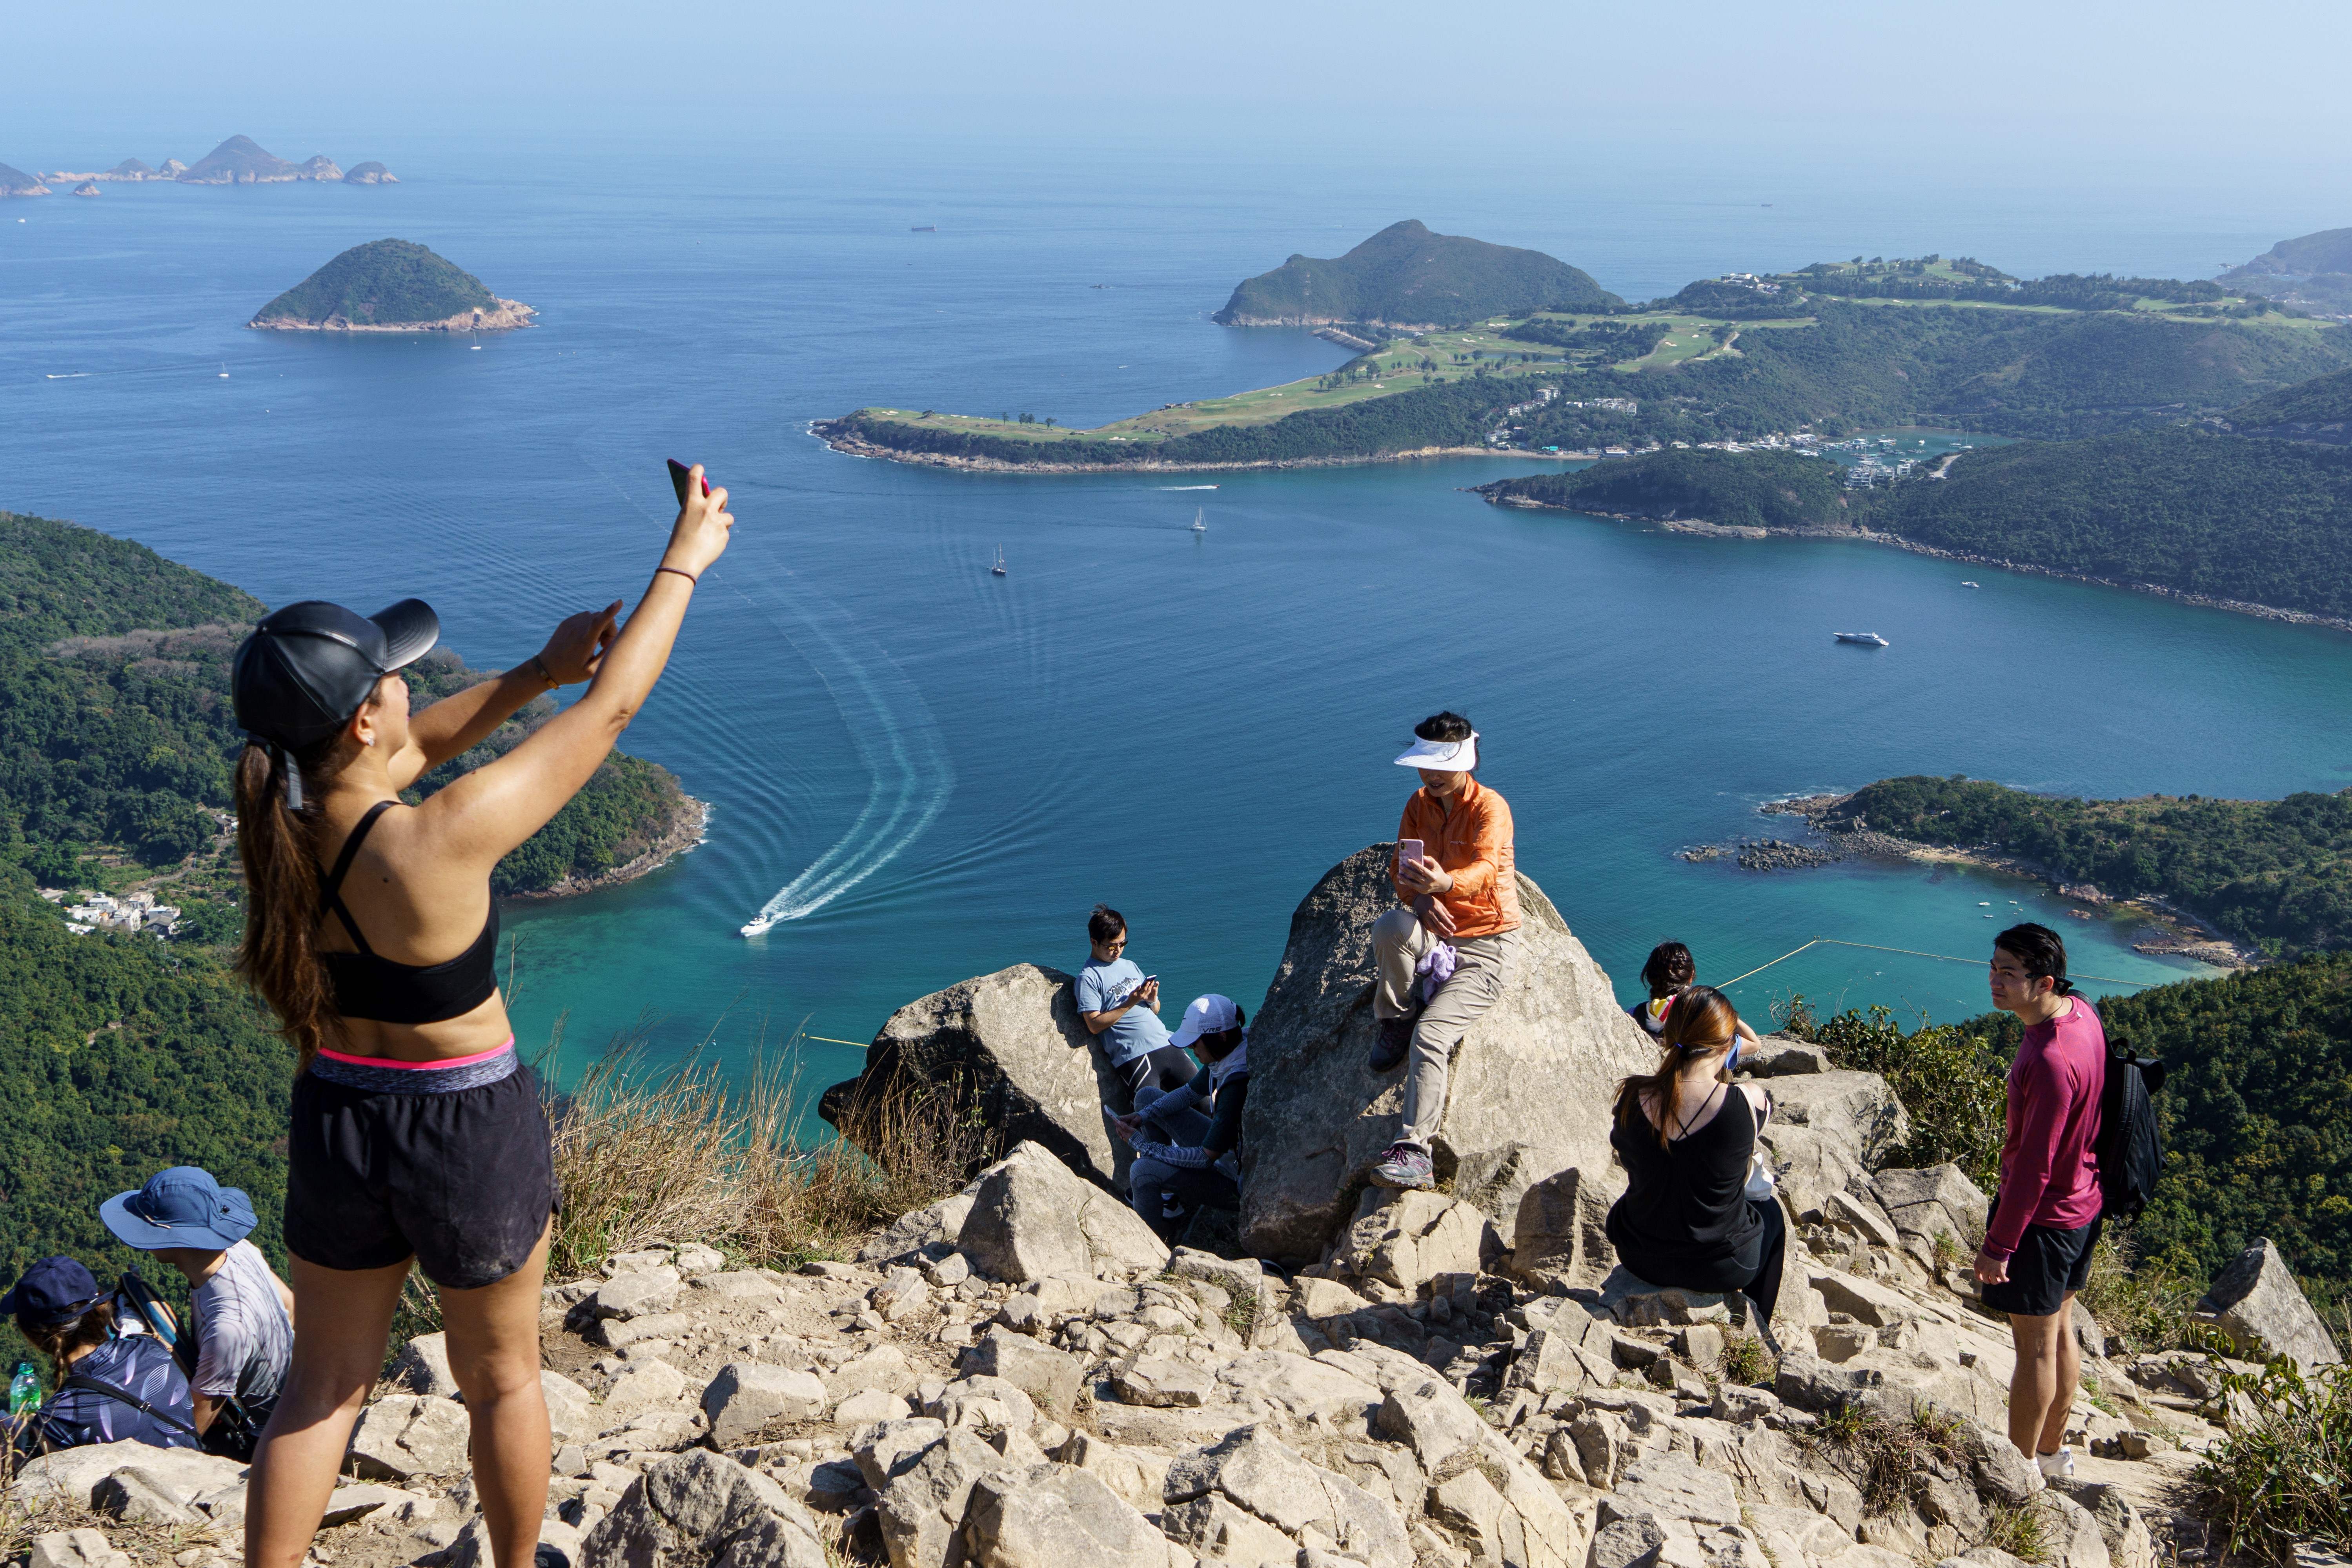 Representative: In this 29 February 2020 photo, hikers take pictures on High Junk Peak overlooking Clearwater Bay in the Tsuen Kwan O area of Hong Kong